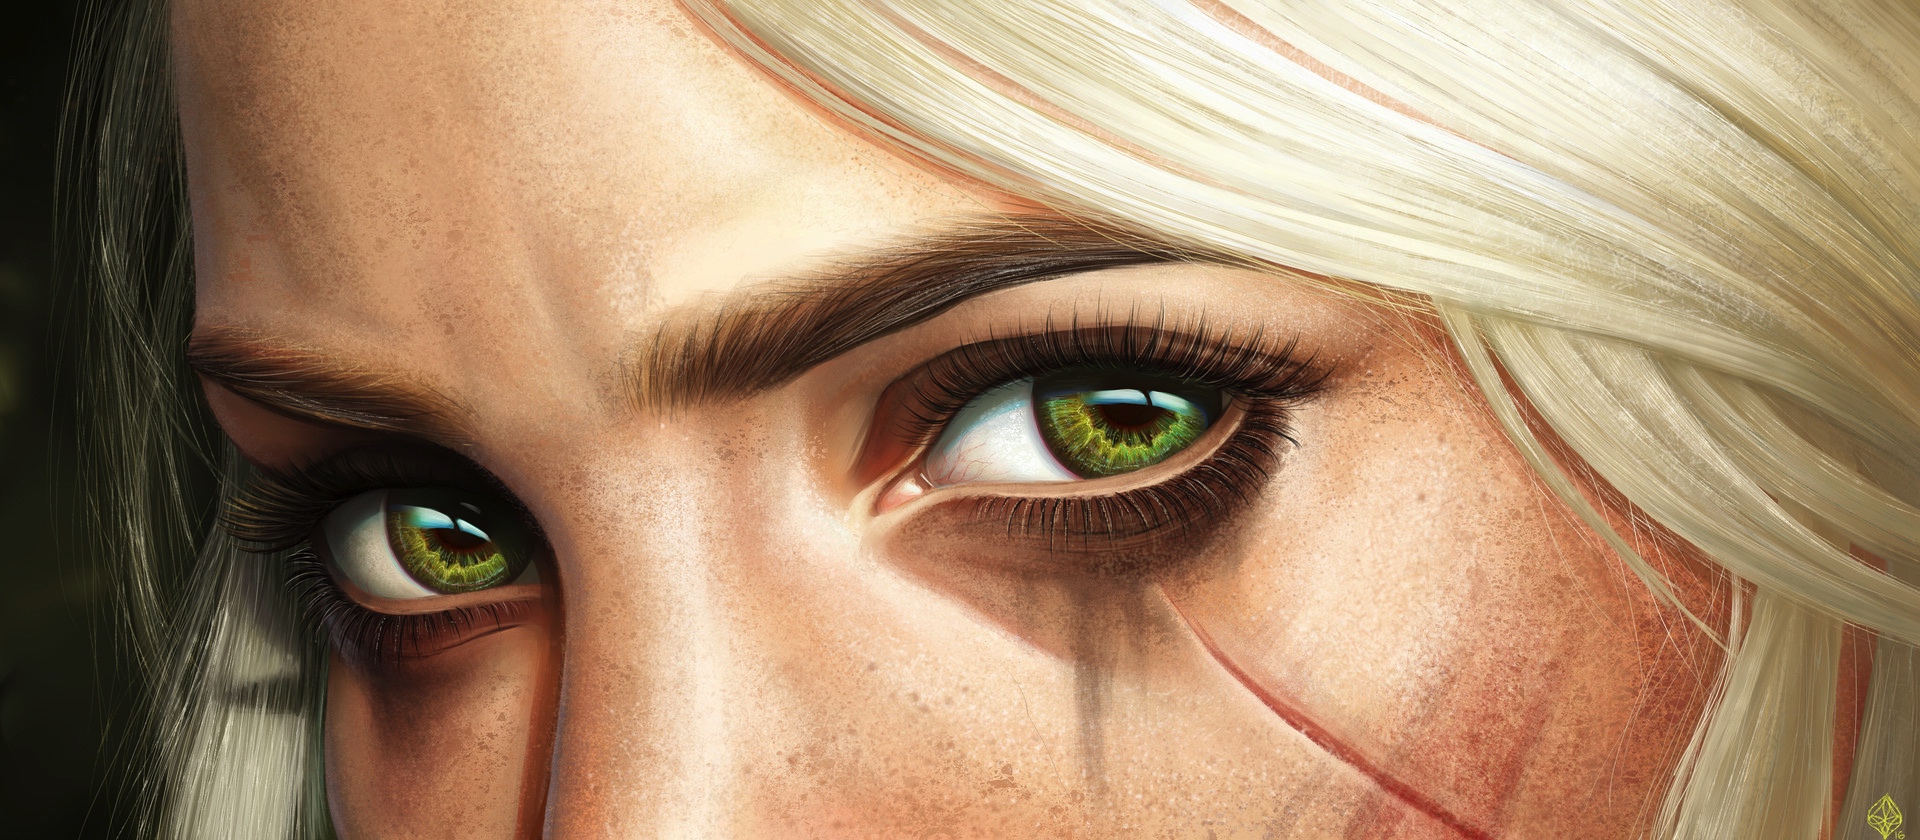 Wallpaper Ciri, The Witcher, game, green eyes